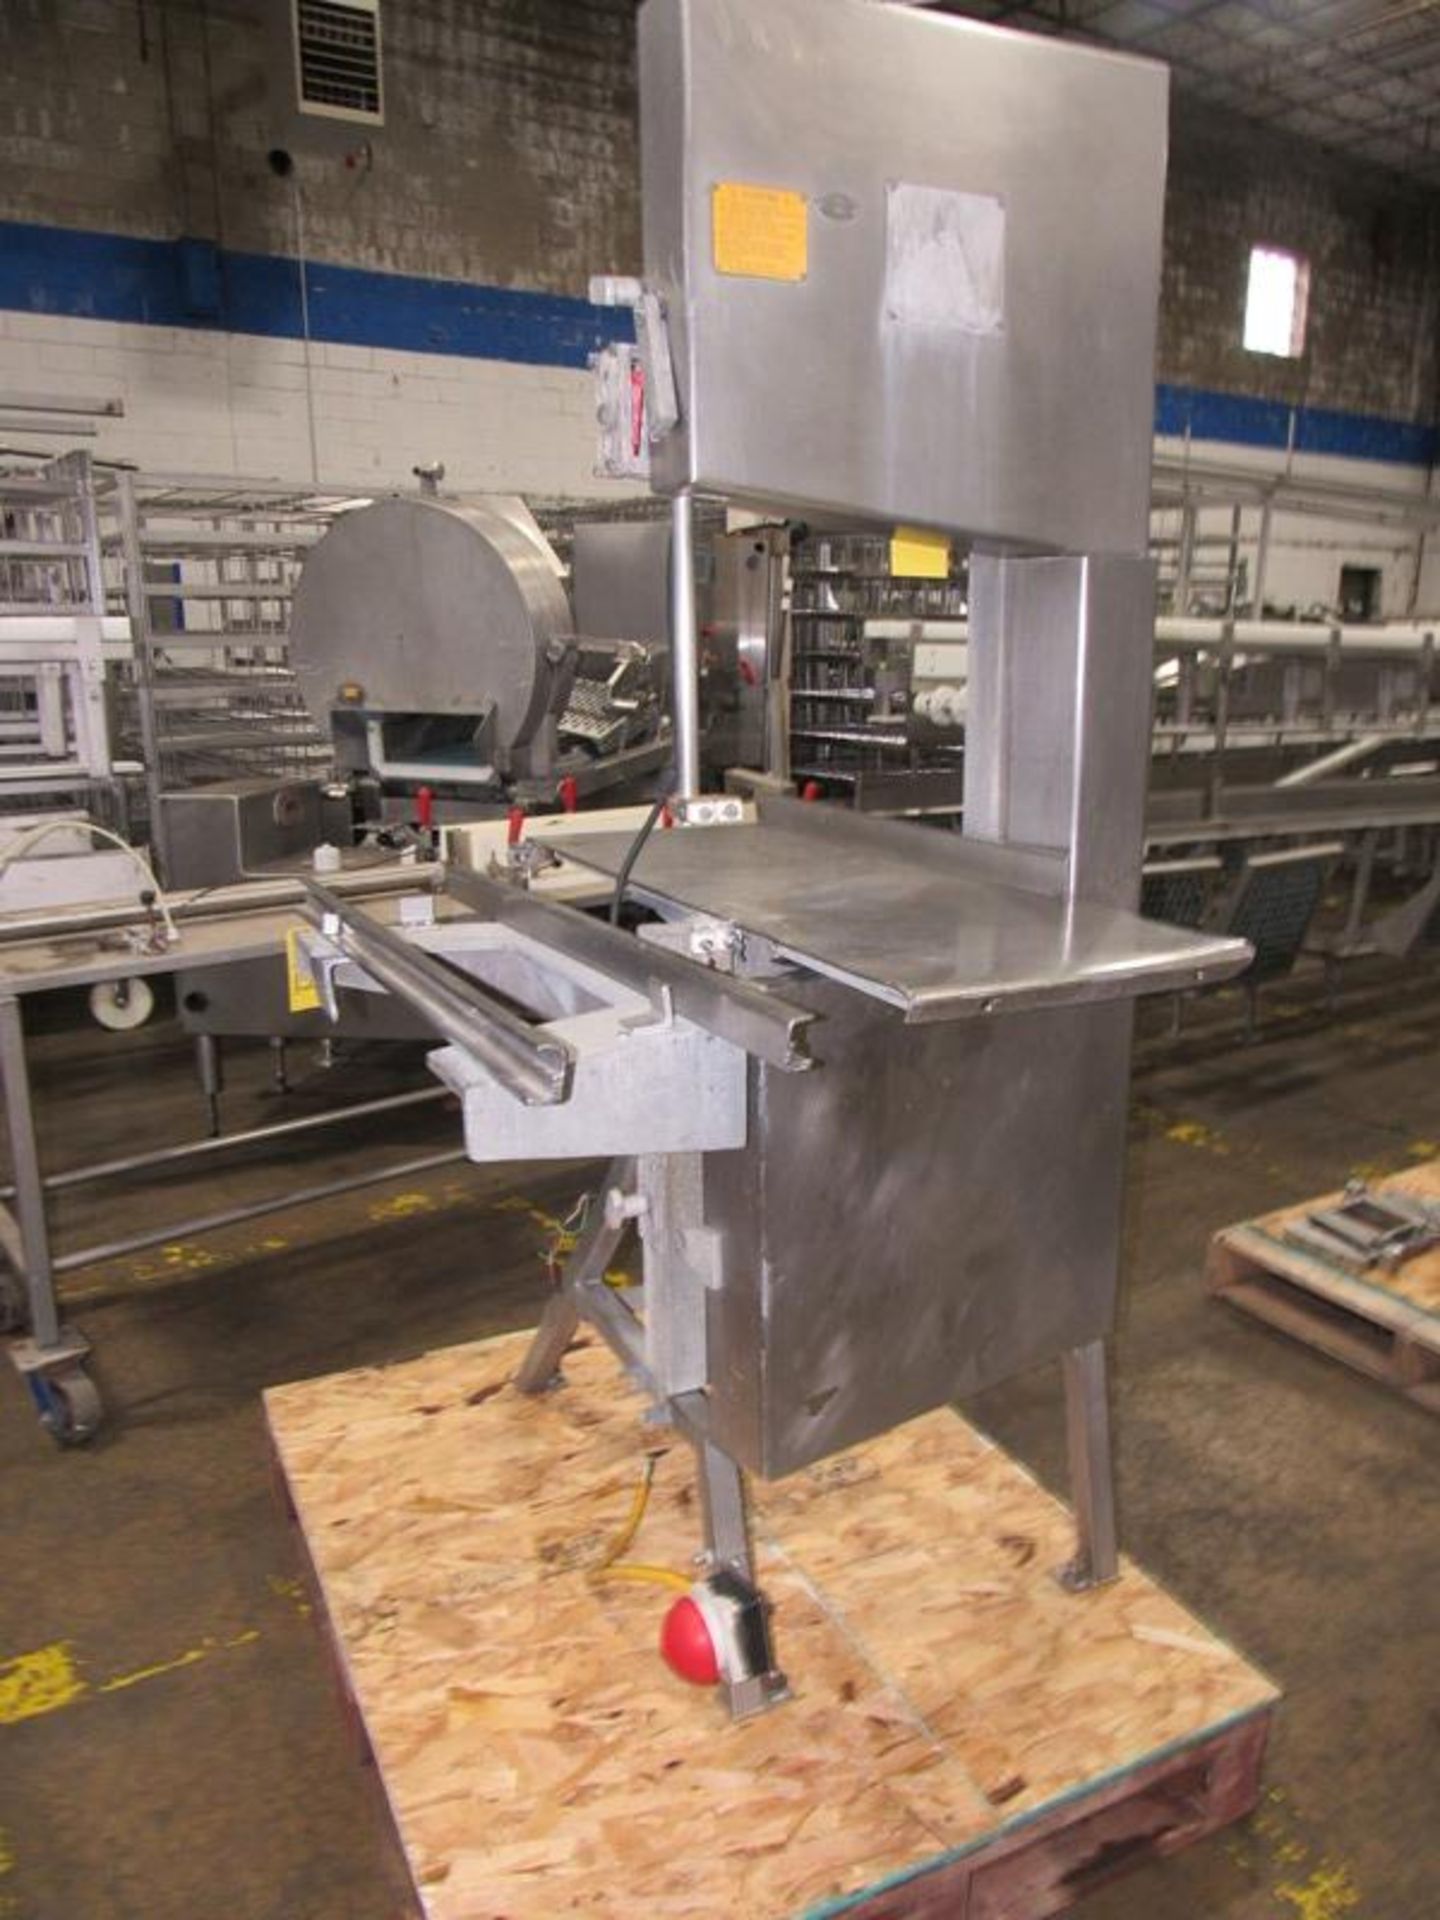 AEW Mdl. 400 Band Saw, aluminum head, missing moveable table and motor cover (Located in Plano, IL) - Image 2 of 6